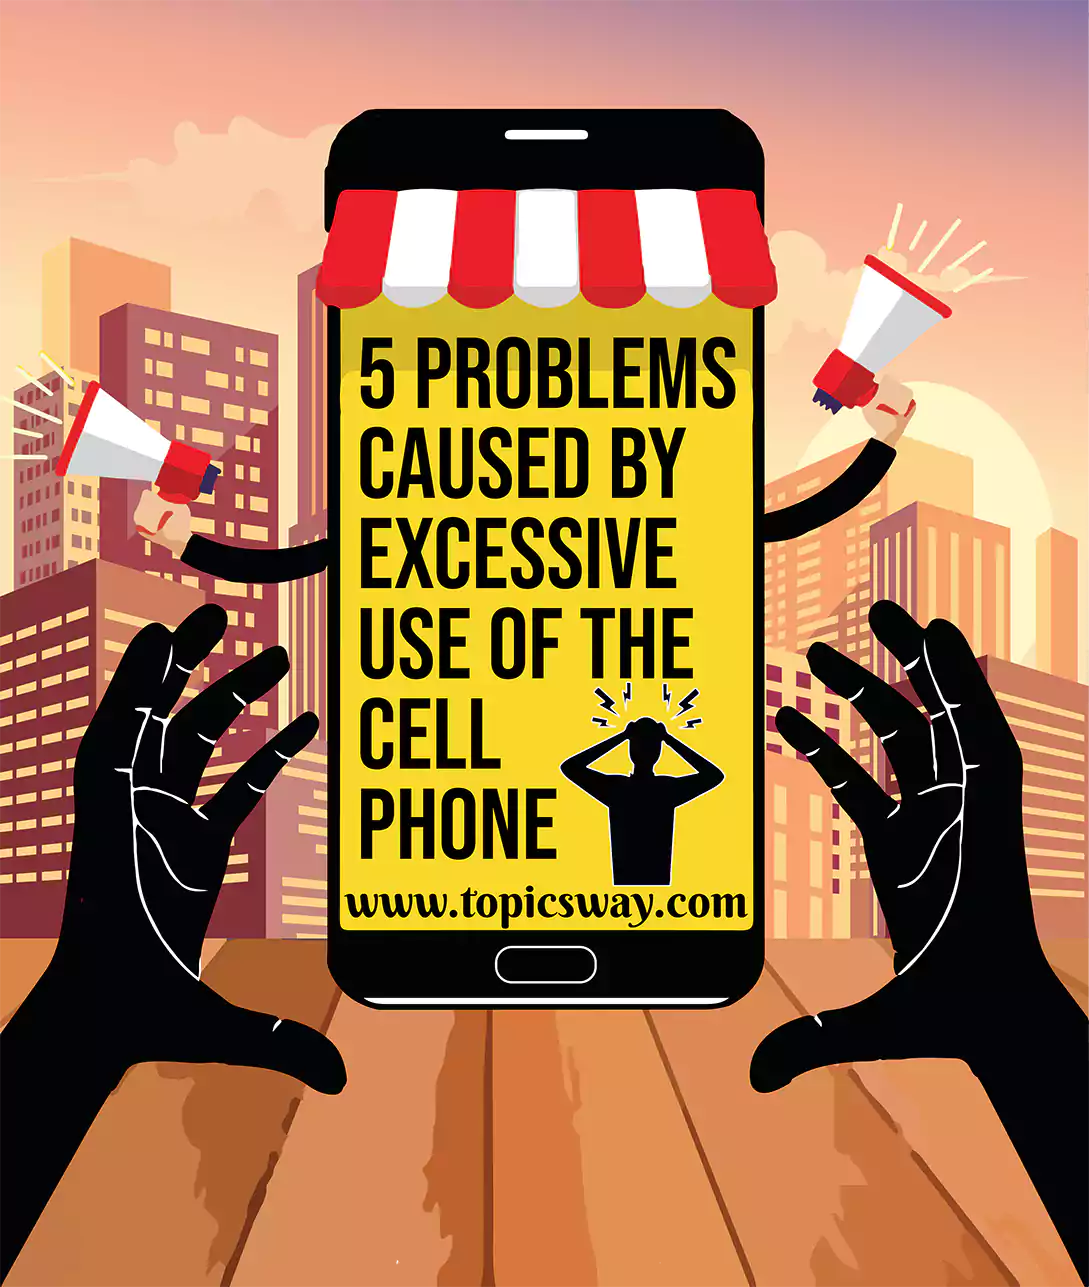 5 Problems Caused by Excessive use of the Cell Phone